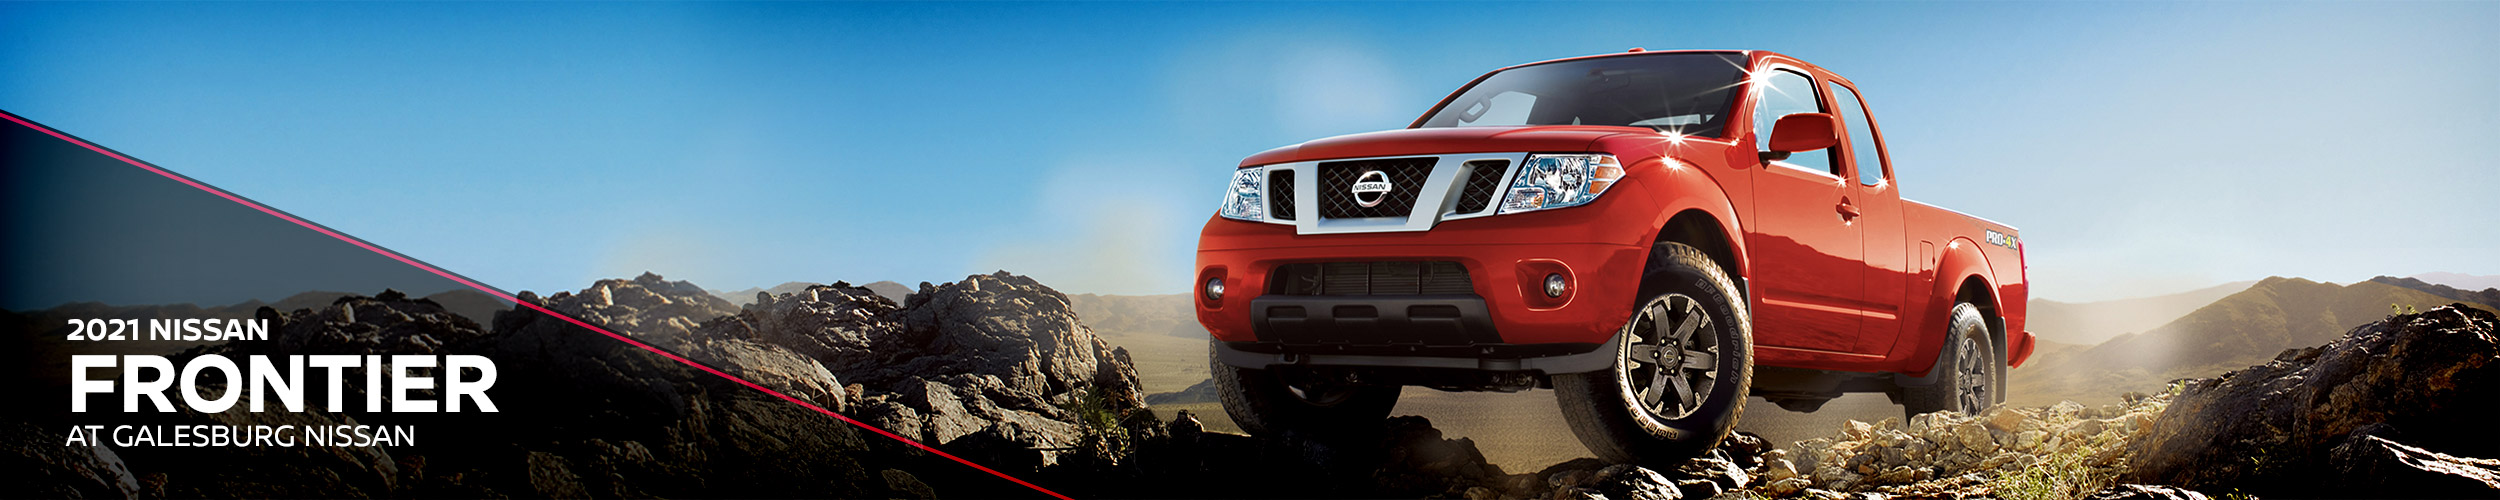 2021 Nissan Frontier At Galesburg Nissan - Galesburg, IL